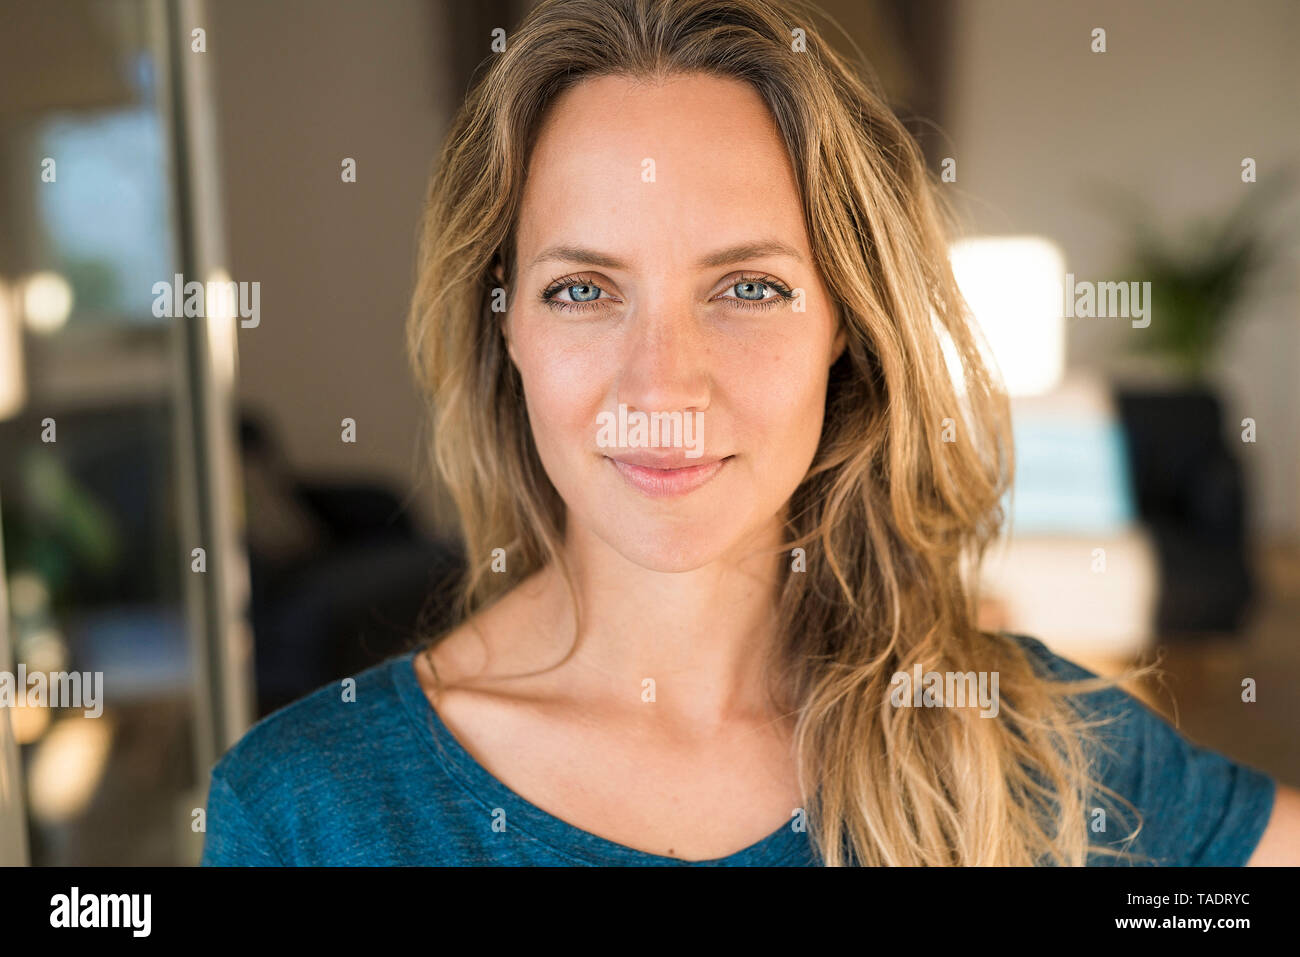 Portrait of smiling blond woman at home Stock Photo